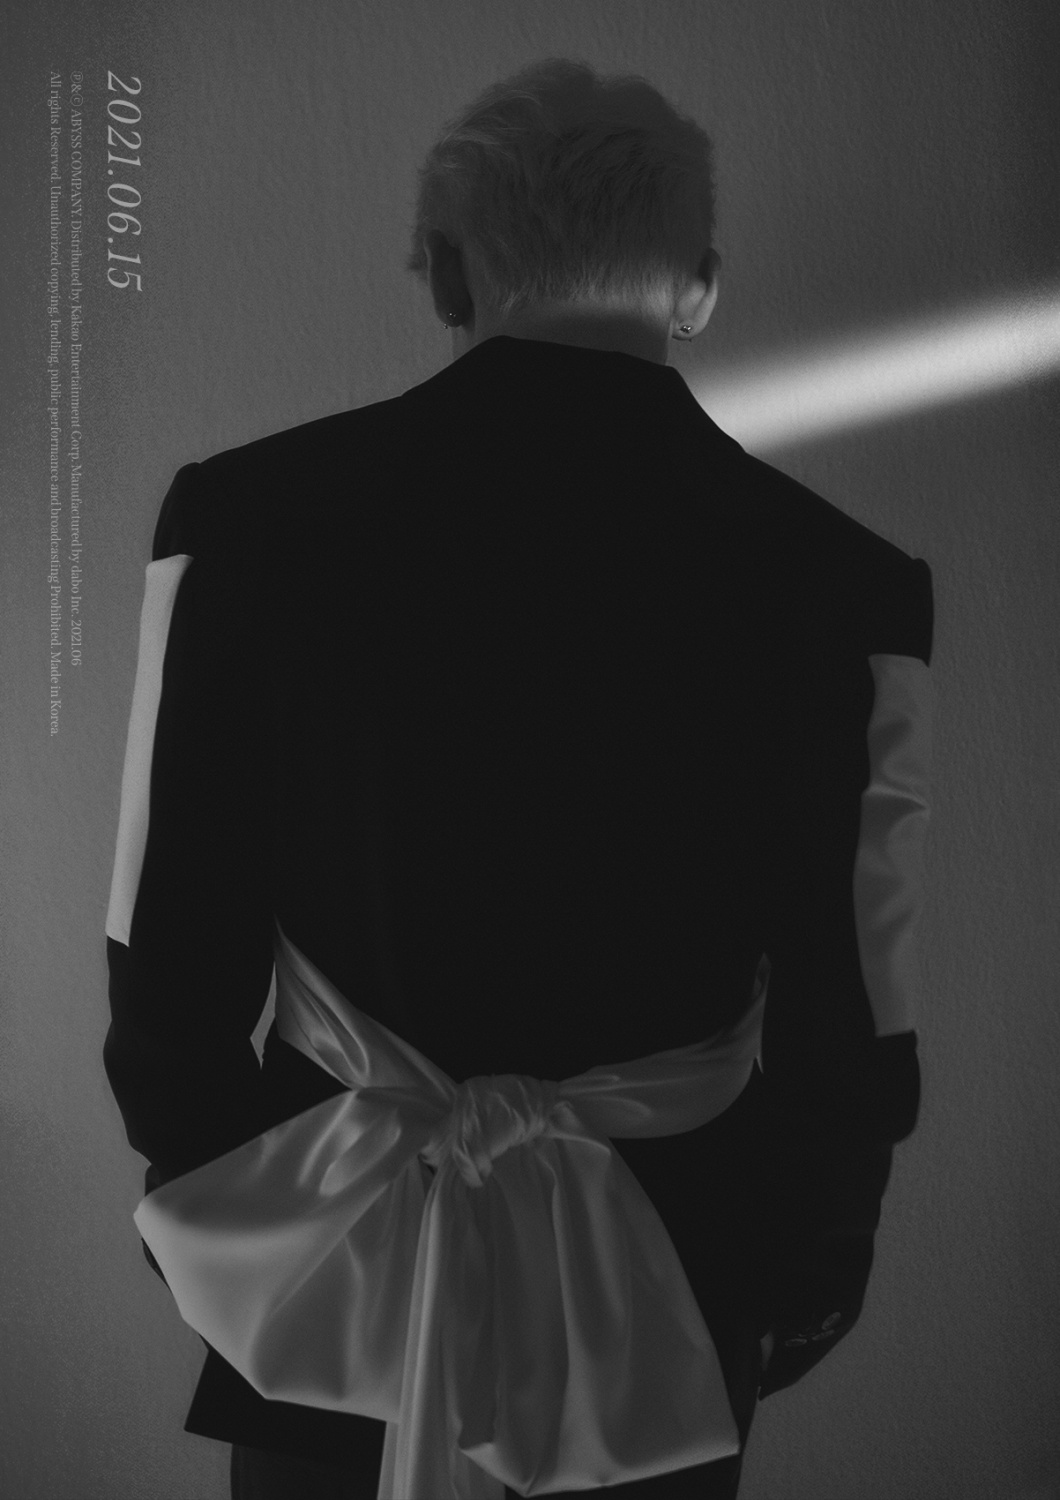 BamBam unveils the first concept photo